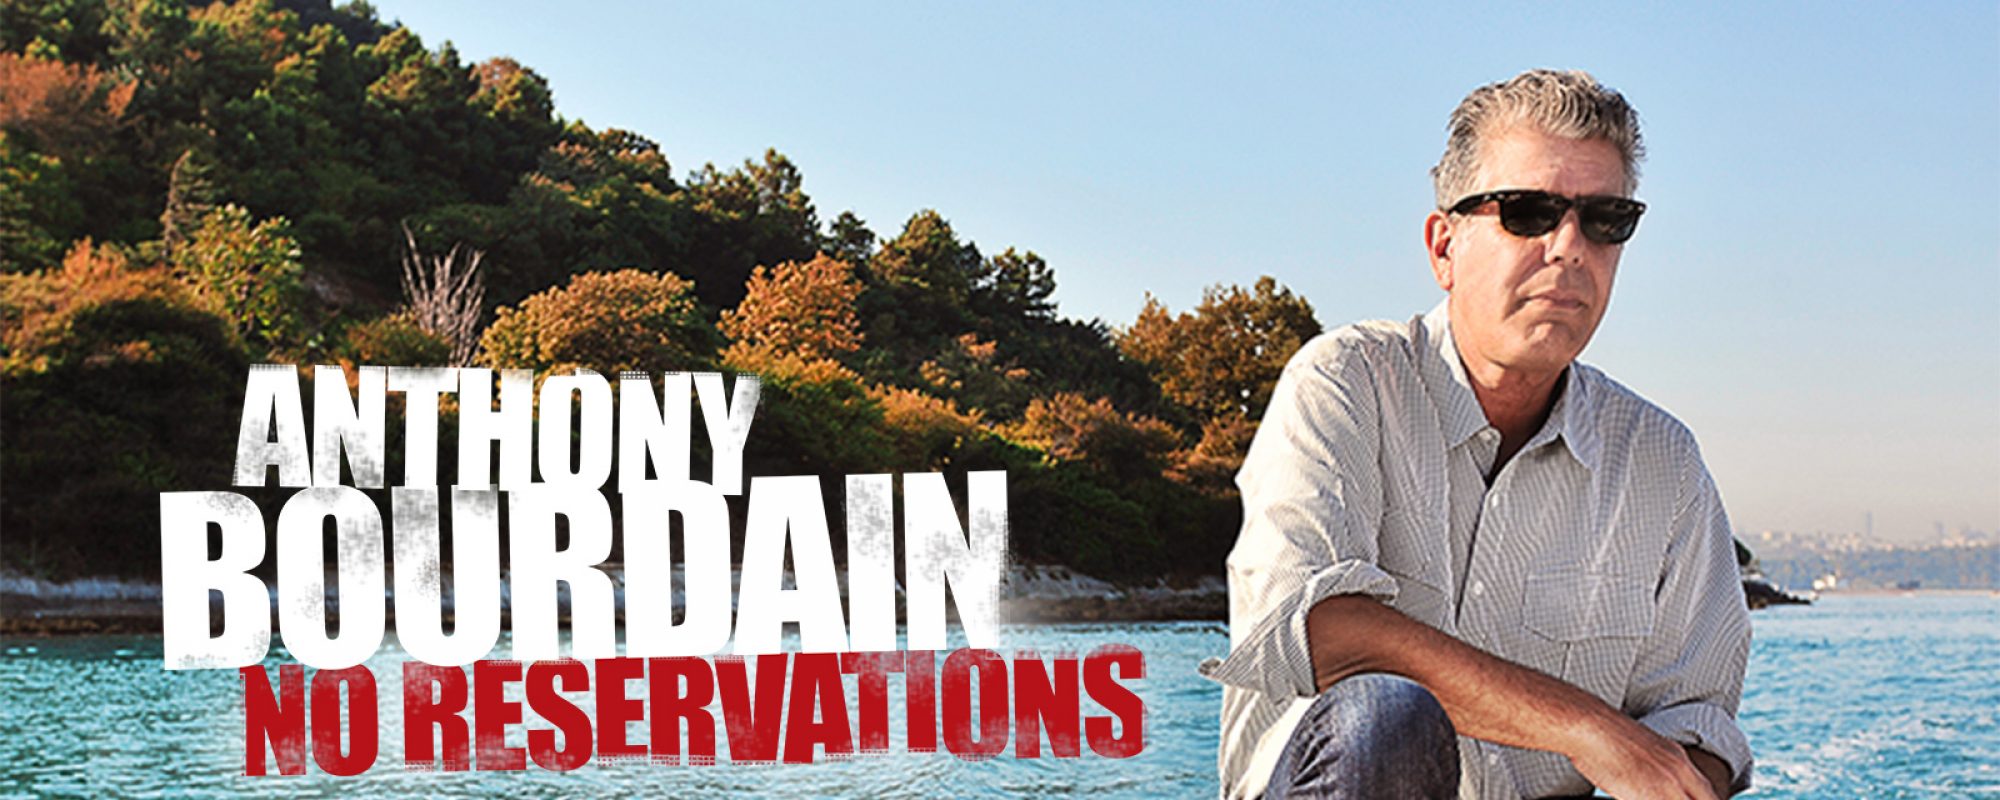 OVATION ACQUIRES LINEAR AND DIGITAL RIGHTS TO FOUR SEASONS OF ANTHONY BOURDAIN: NO RESERVATIONS FROM DISCOVERY